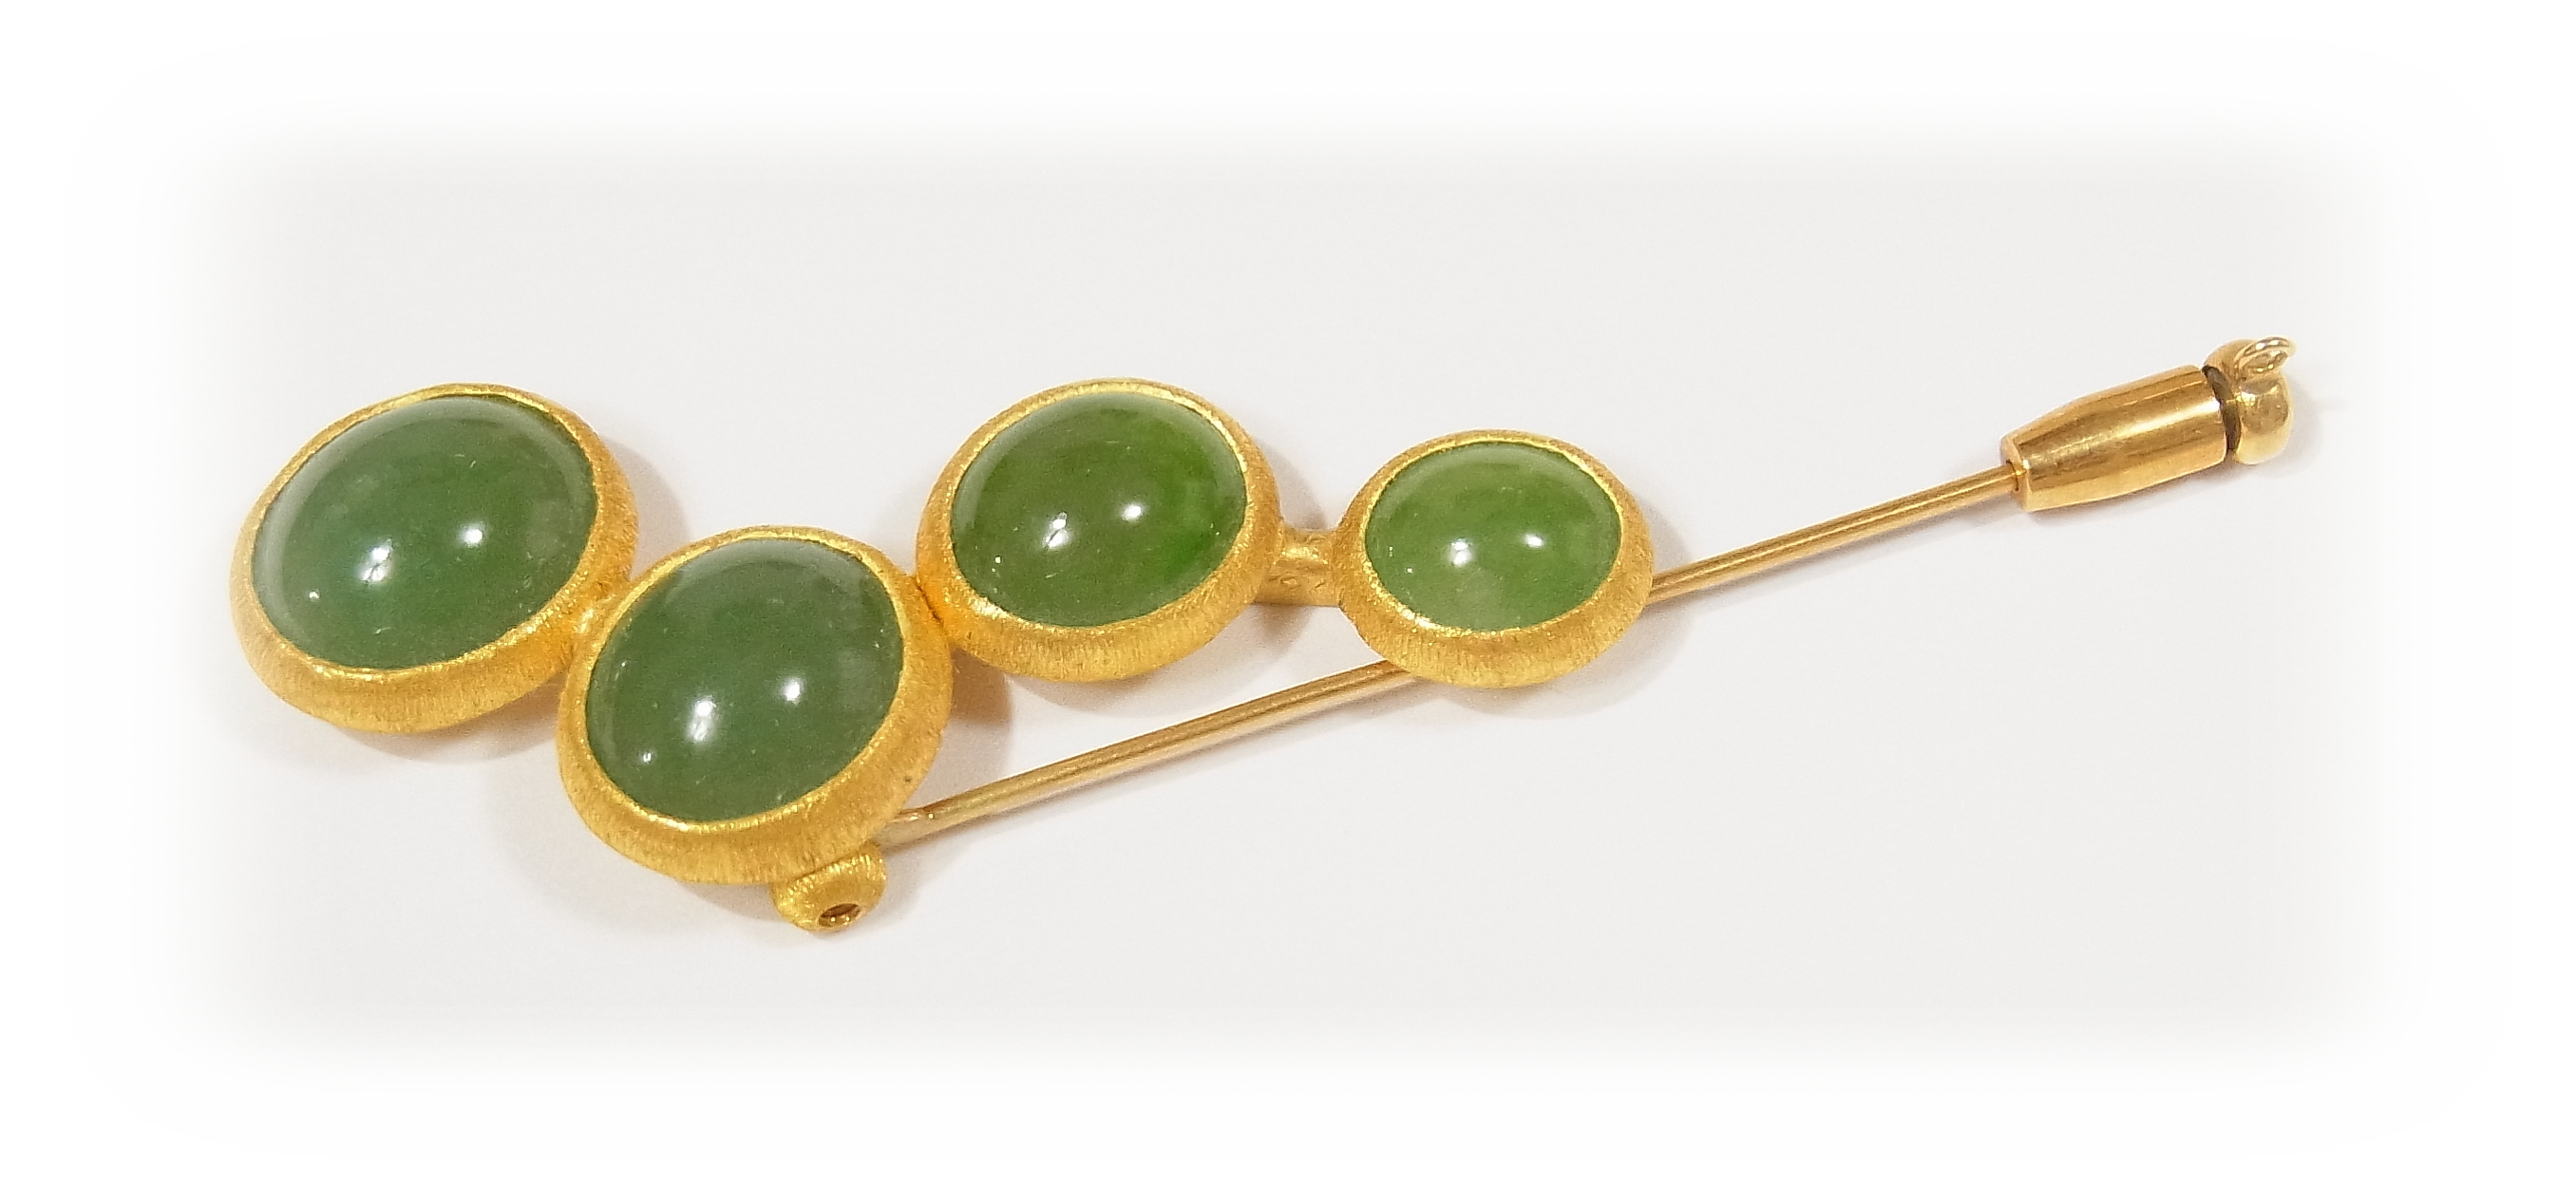 Grape gold brooch with Green Cabochon Jadeite